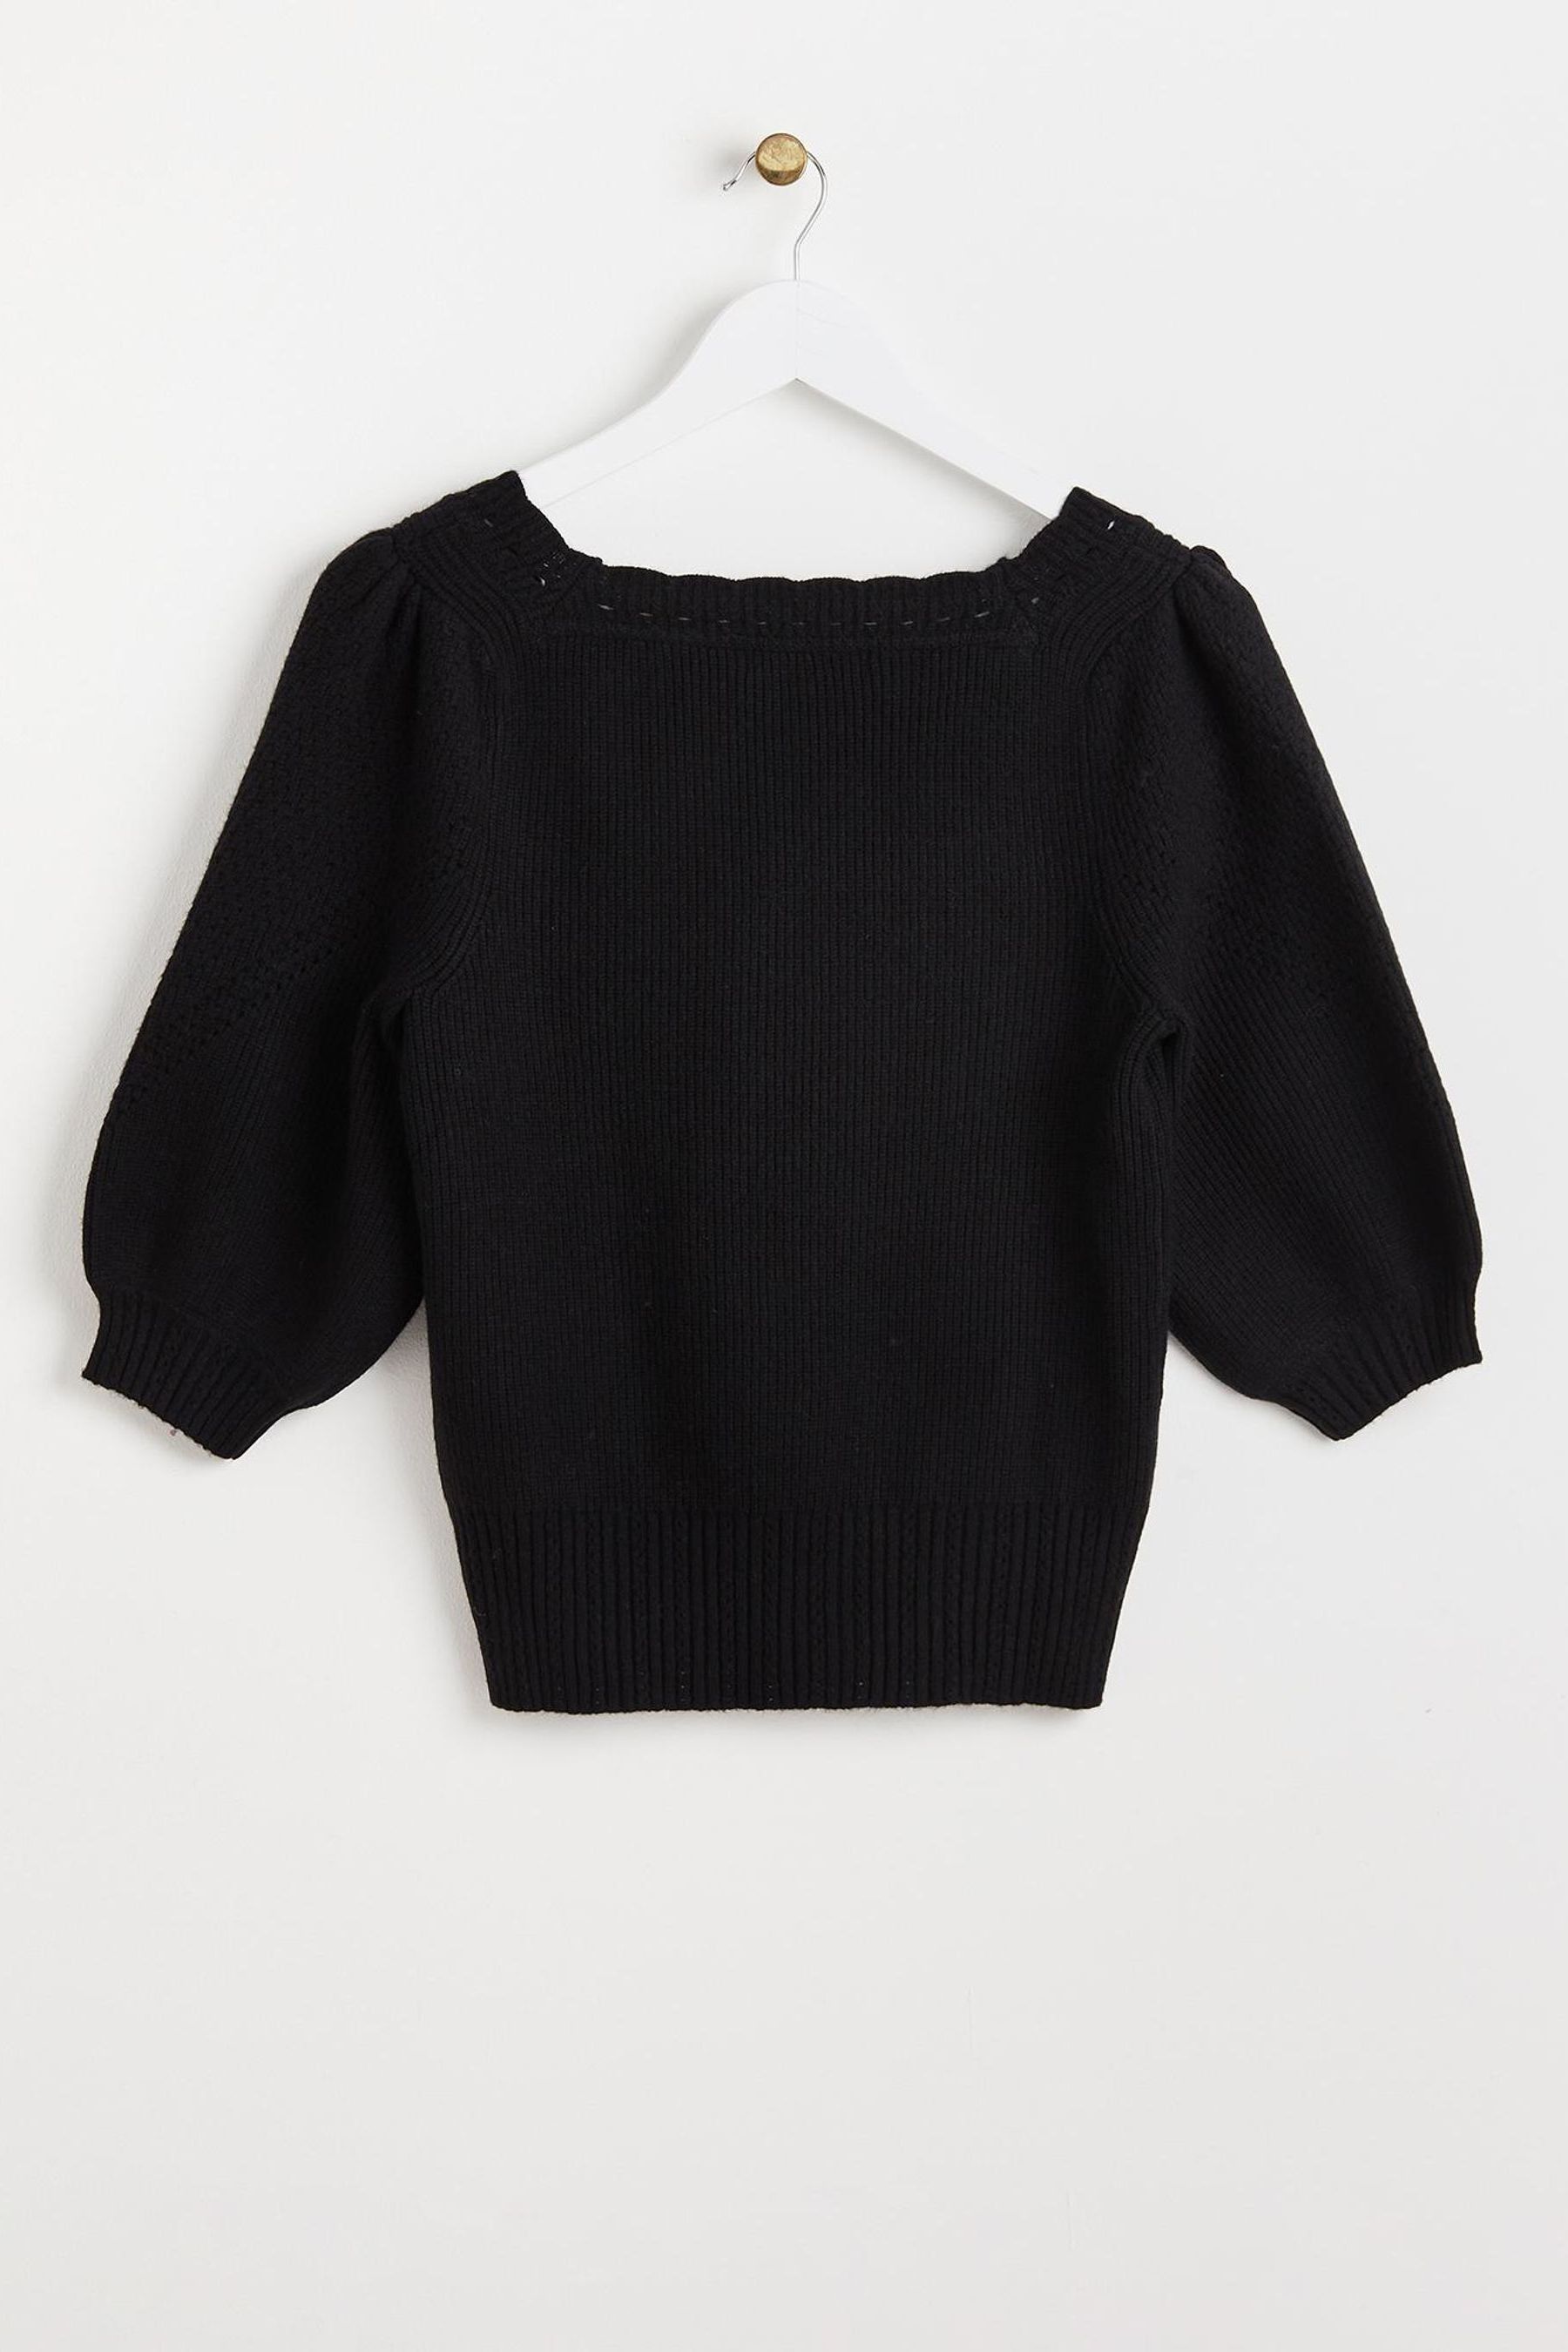 Buy Oliver Bonas Scalloped Knitted Black Crop Top from the Next UK ...